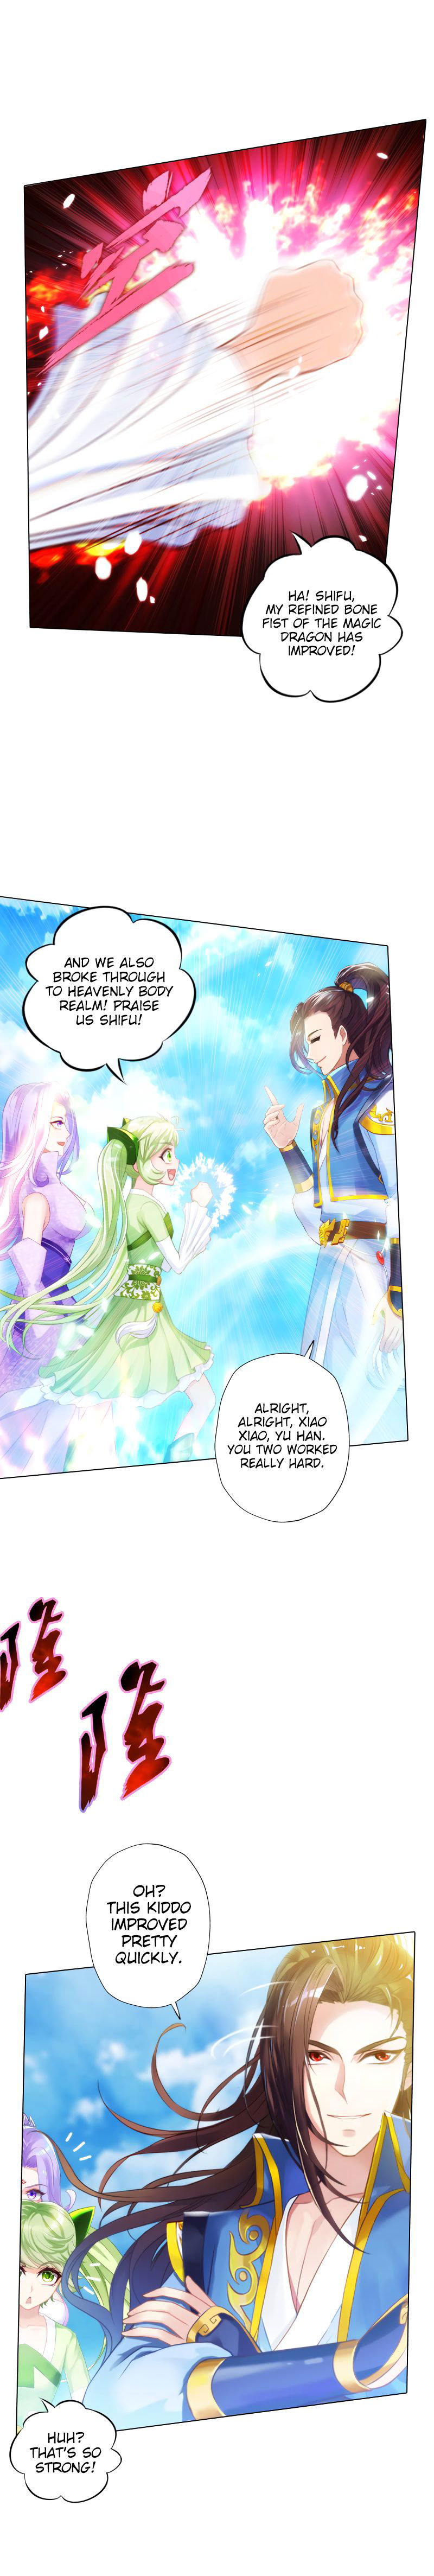 Lang Huan Library Chapter 39 page 8